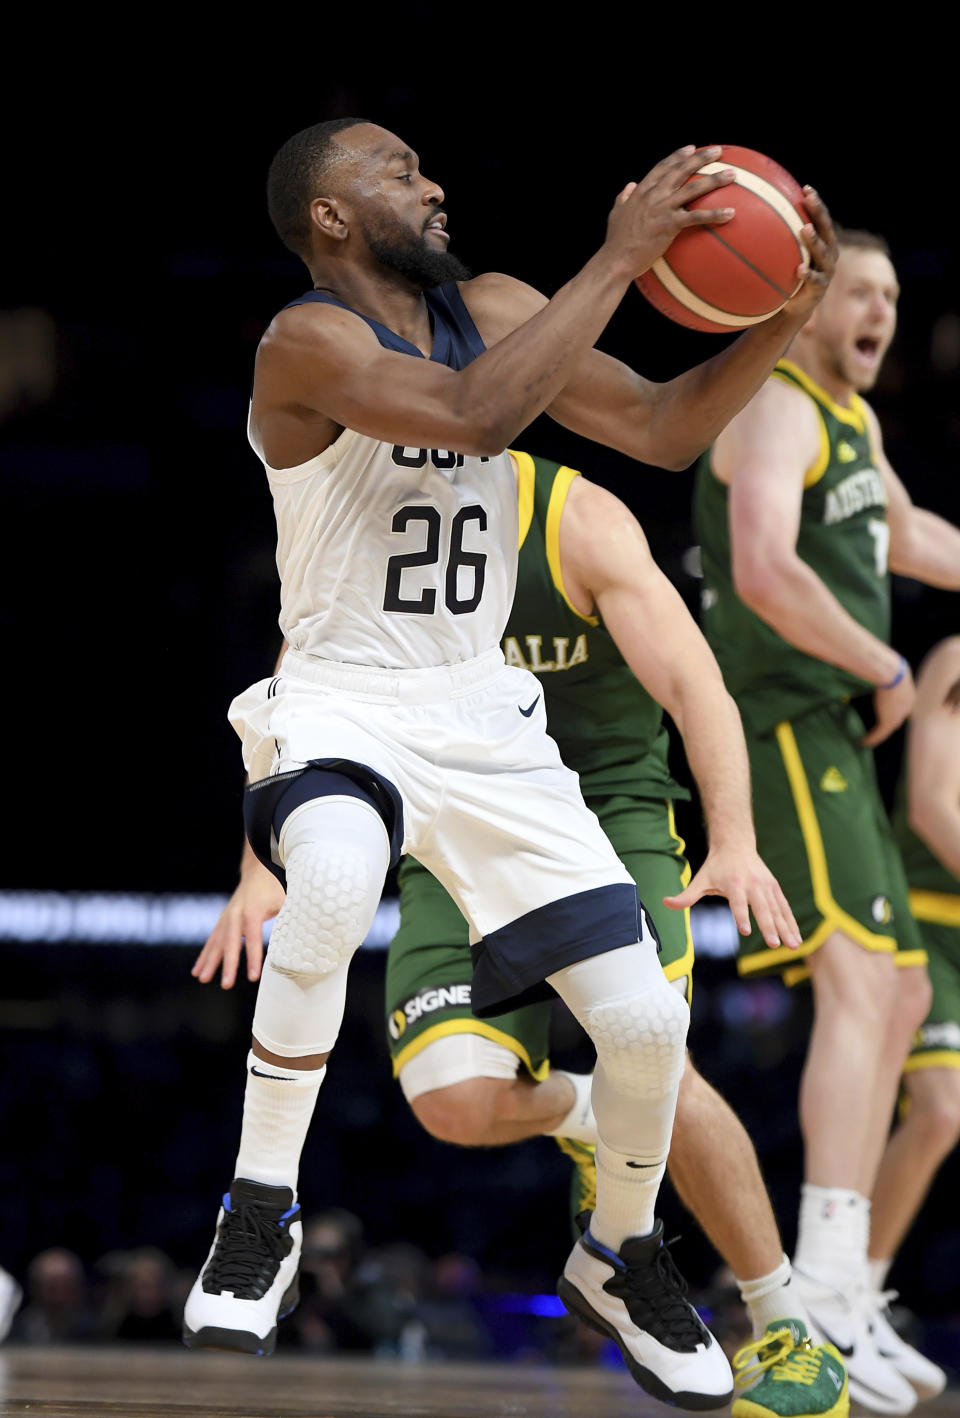 United States' Kemba Walker attempts a shot during their exhibition basketball game against Australia in Melbourne, Thursday, Aug. 22, 2019. (AP Photo/Andy Brownbill)